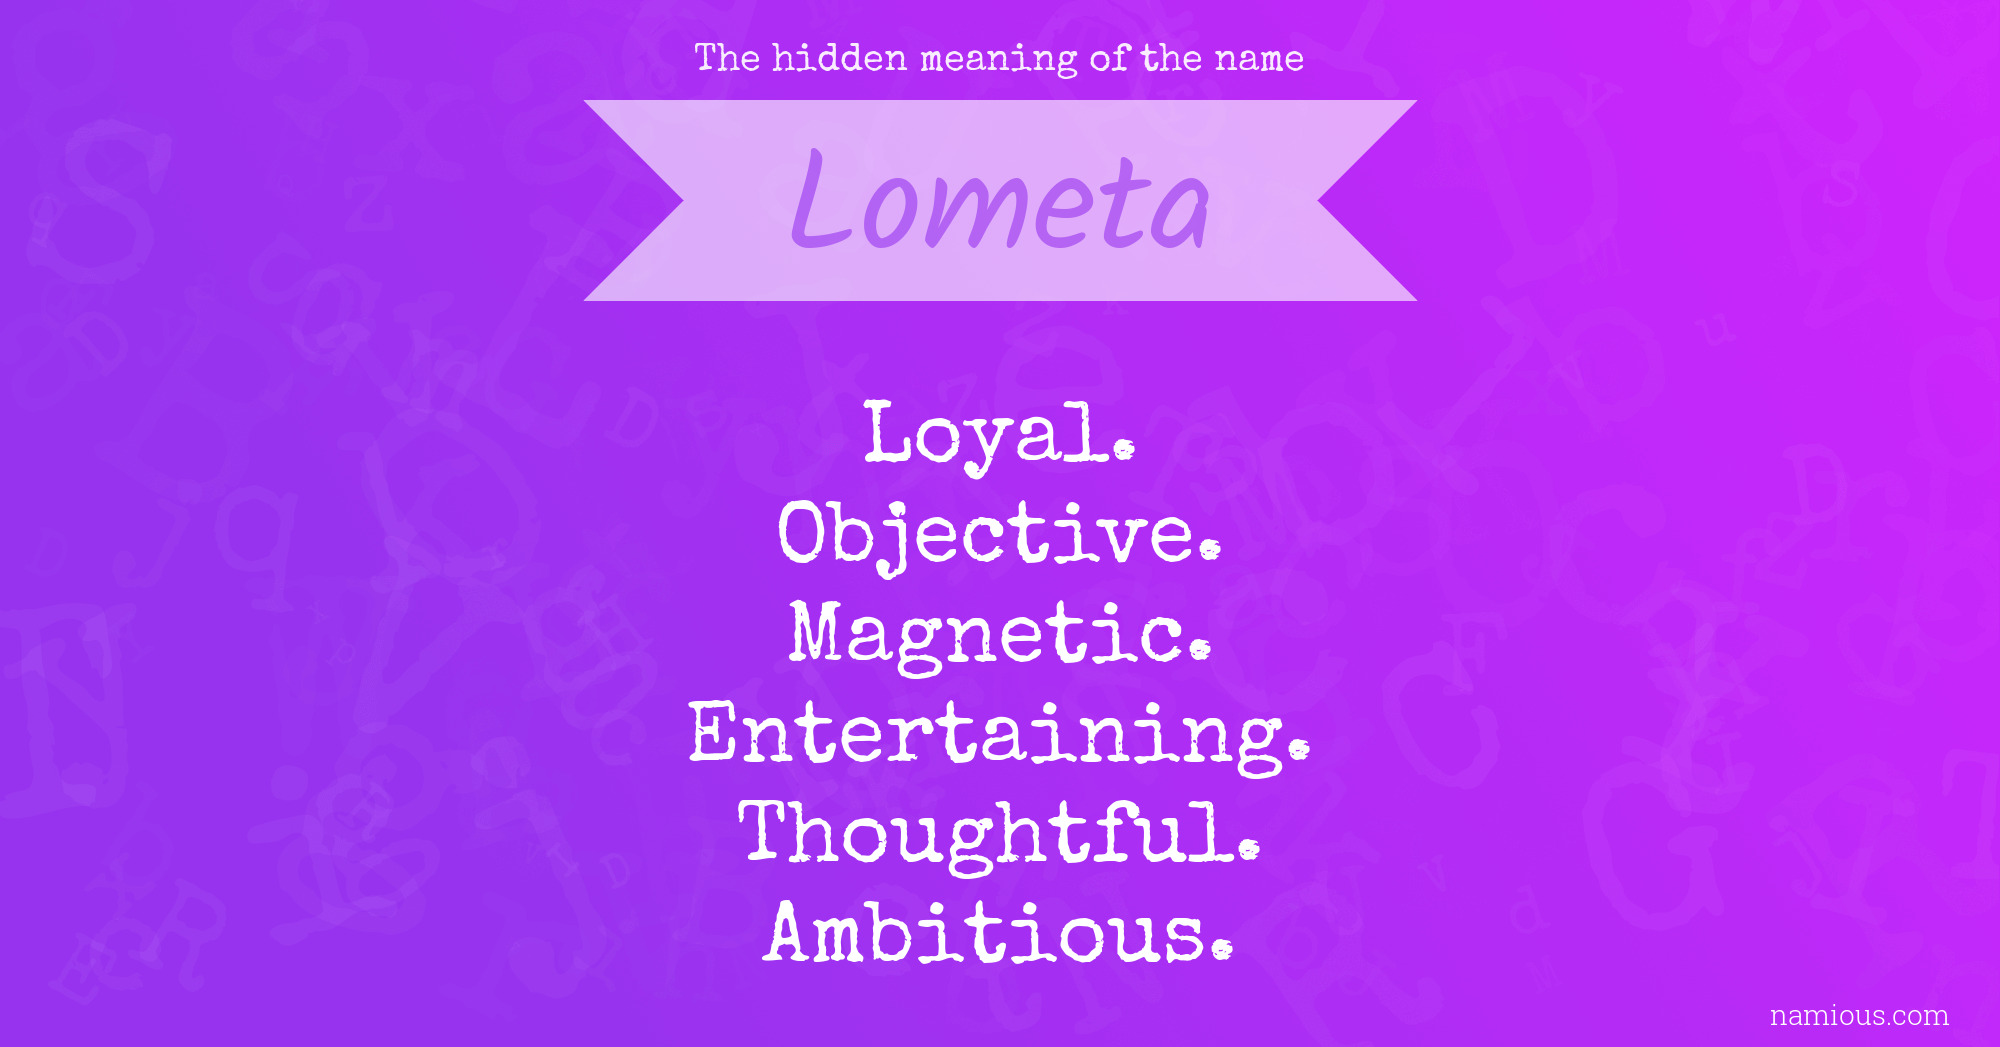 The hidden meaning of the name Lometa